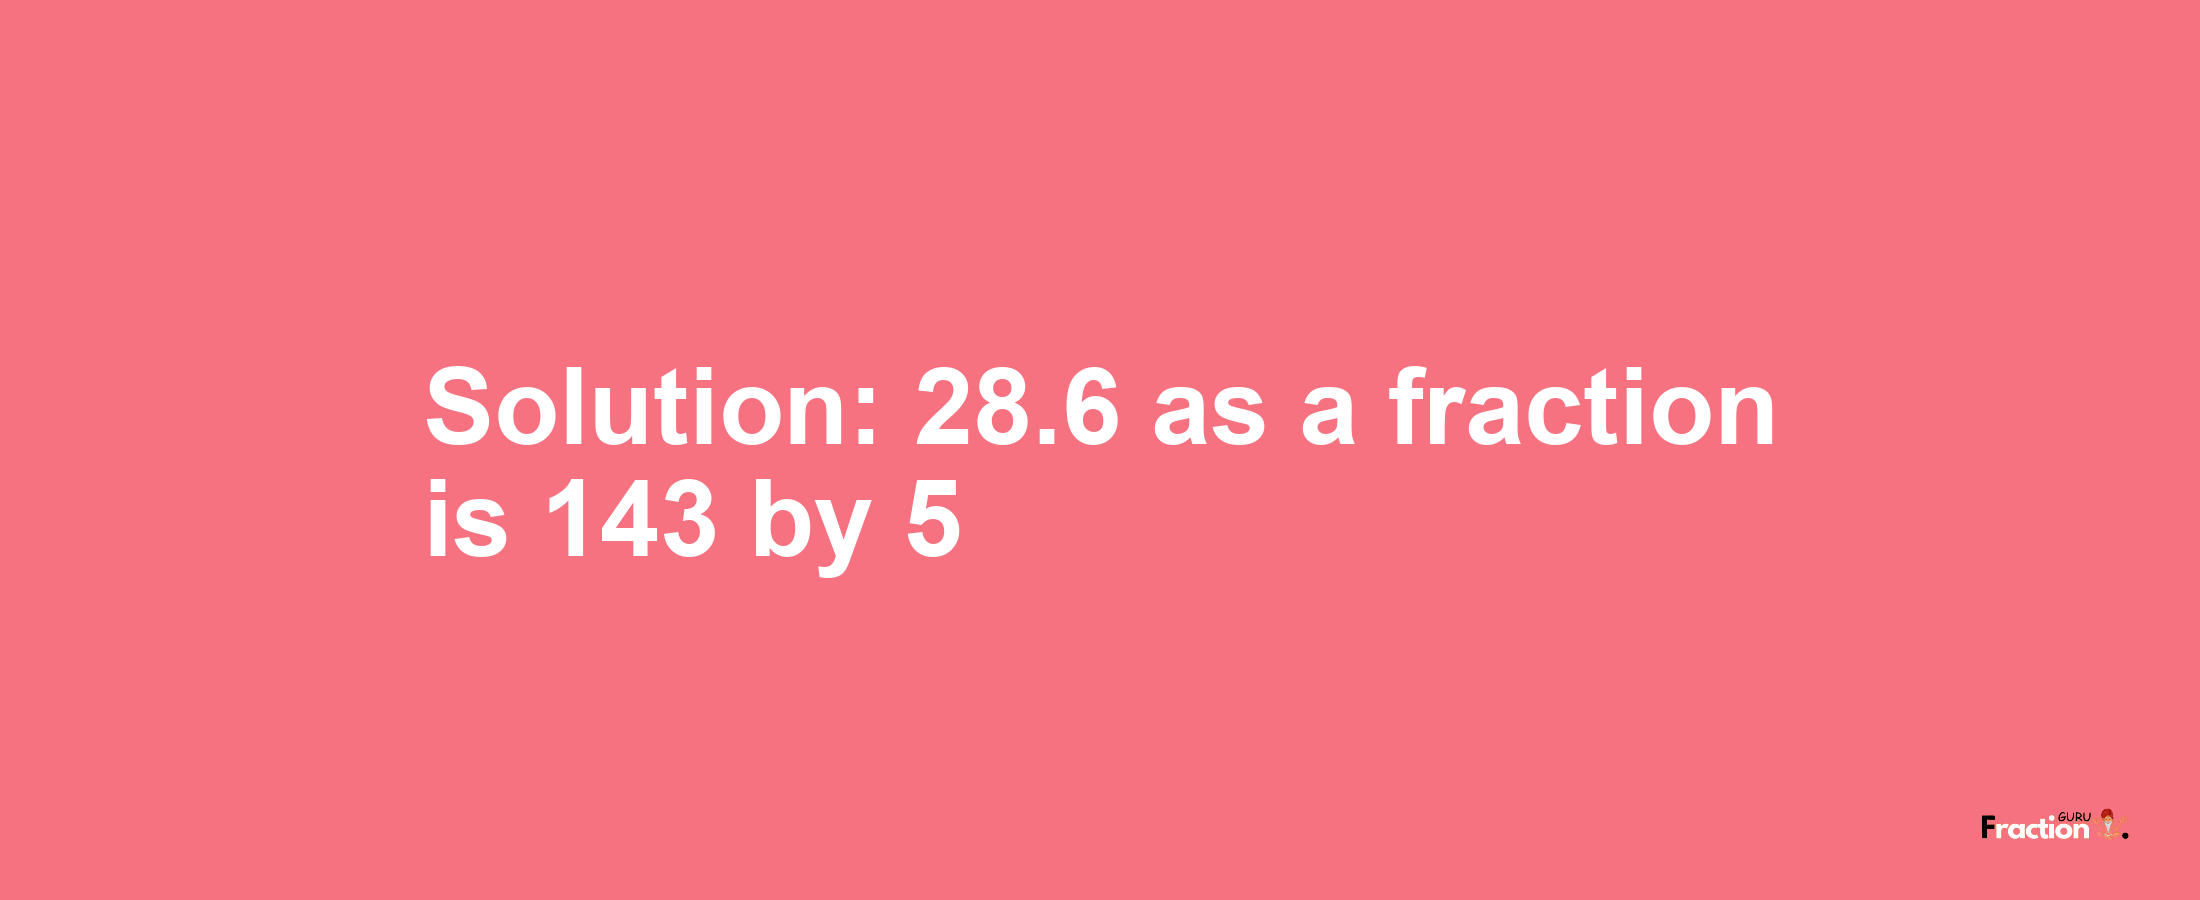 Solution:28.6 as a fraction is 143/5